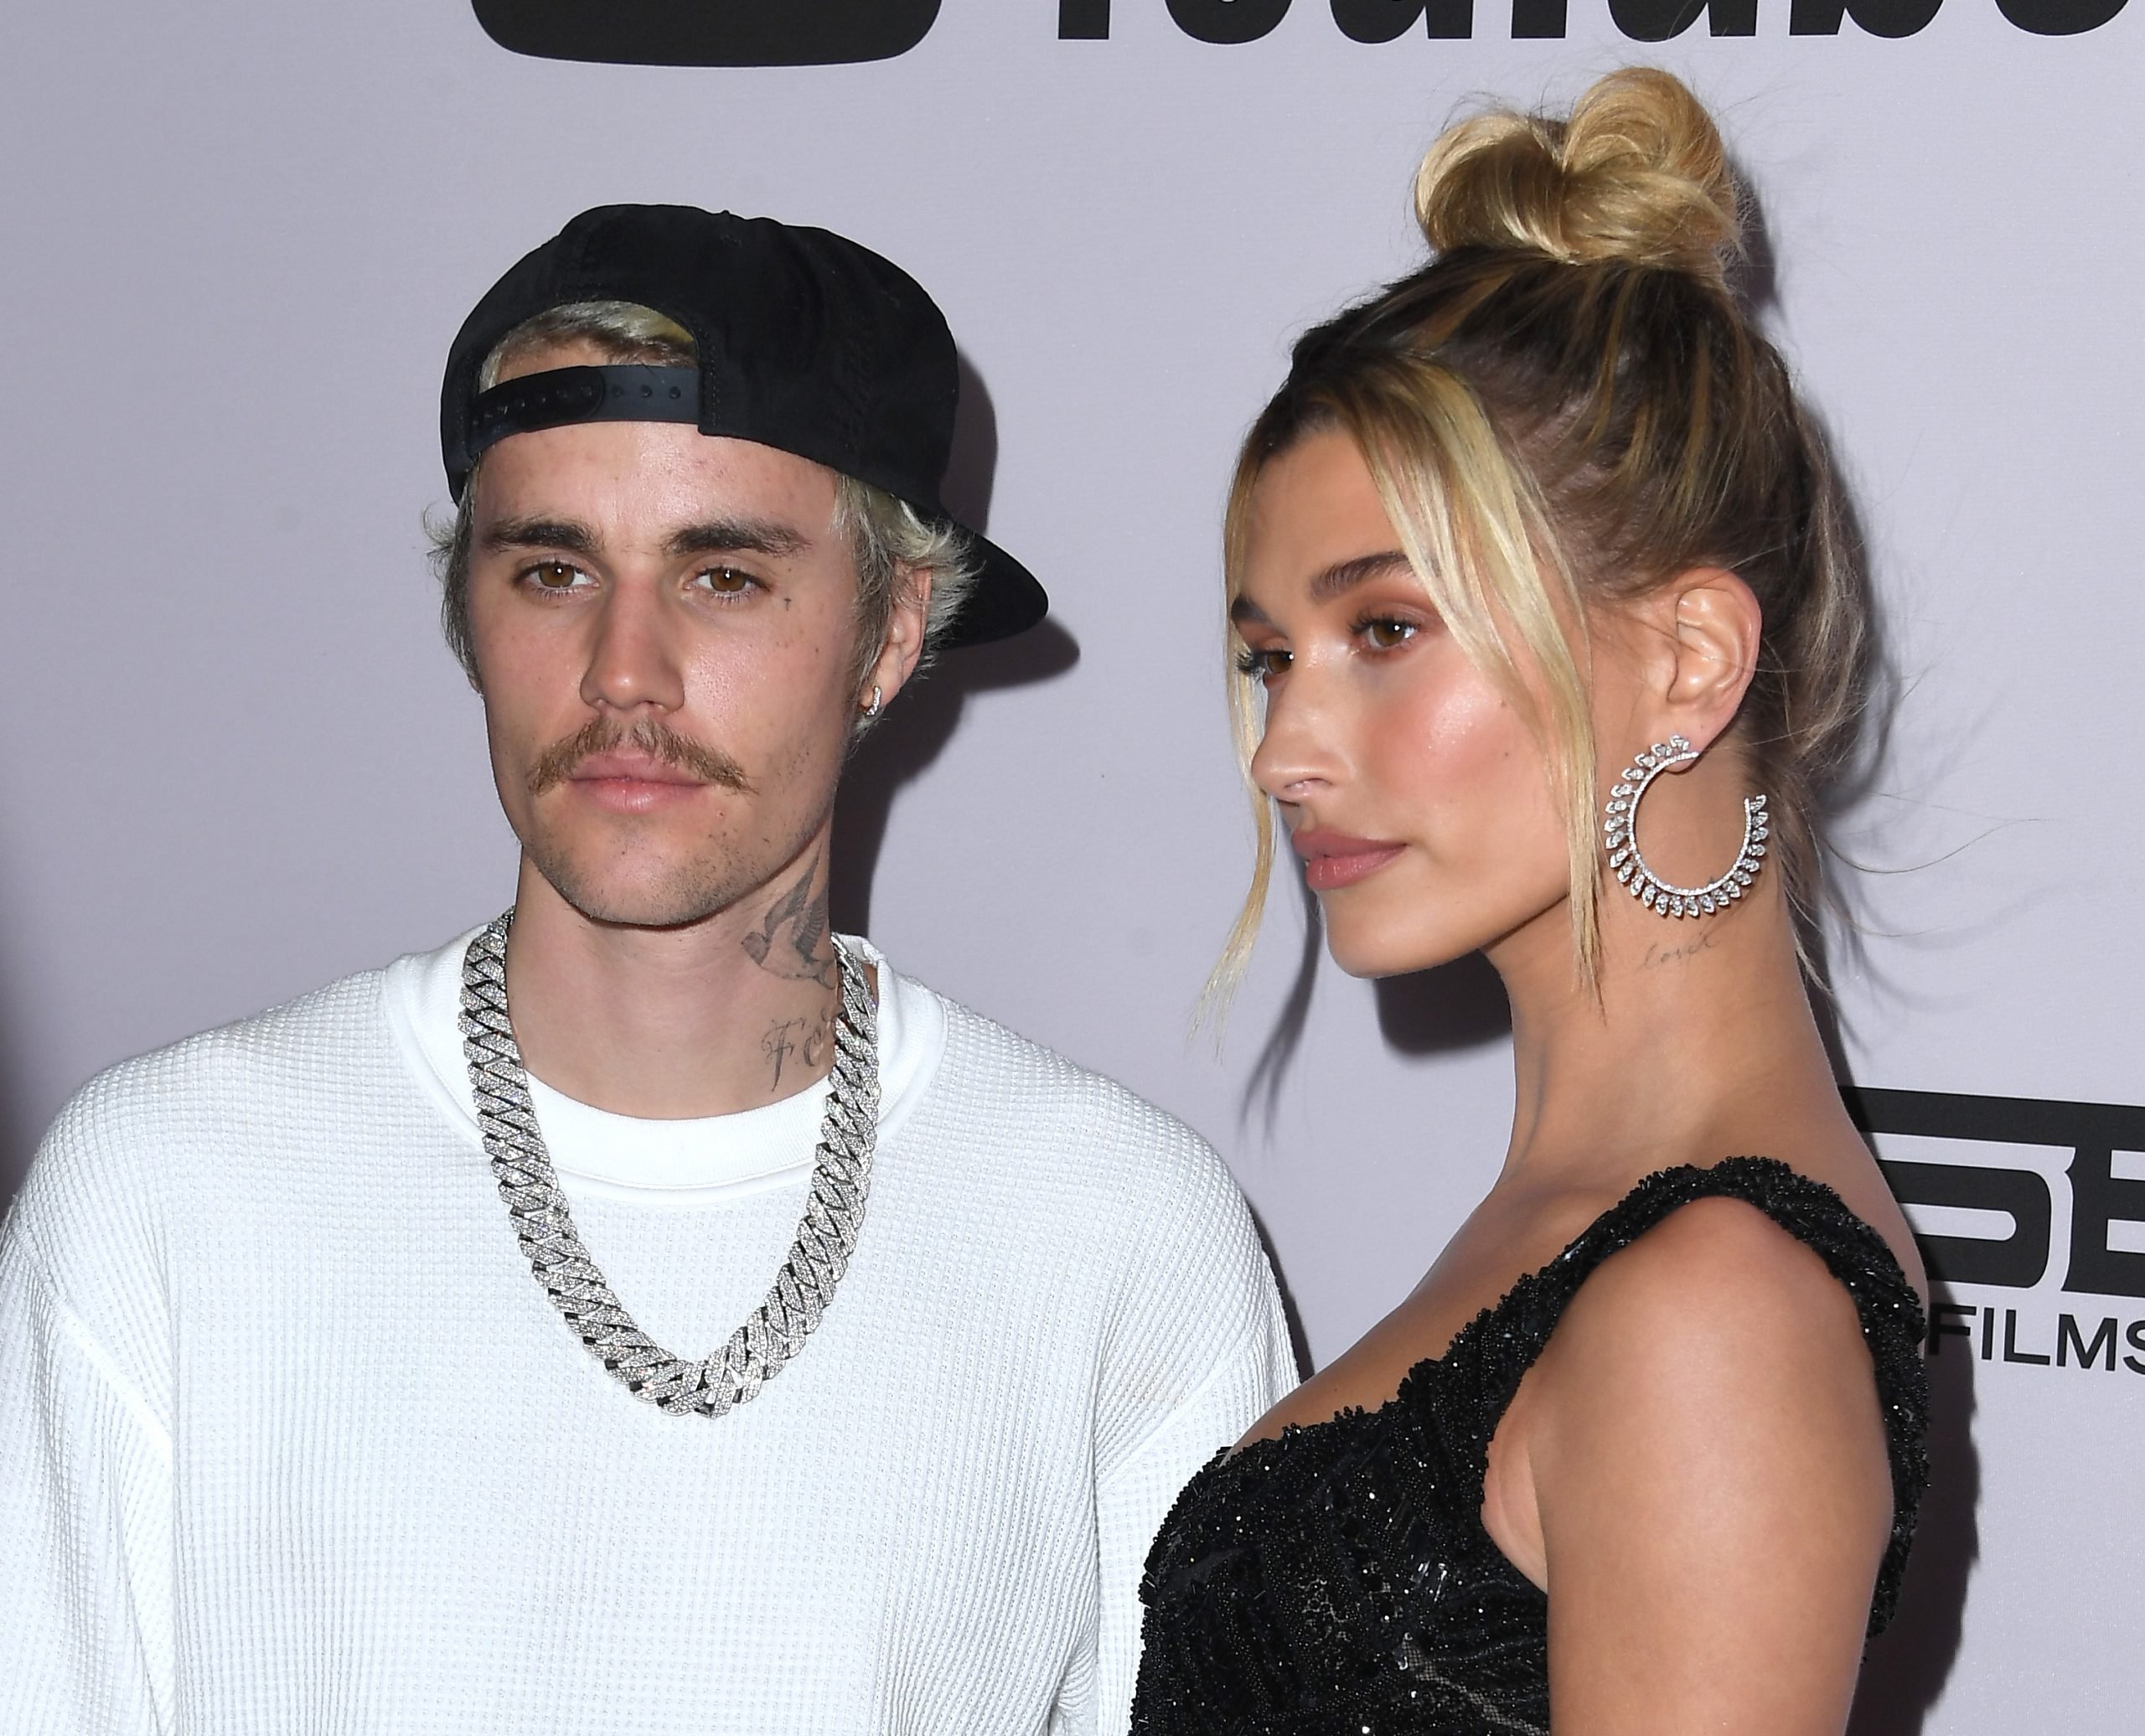 Why Did Hailey Bieber Leave Justin Bieber Following the Sexual Assault